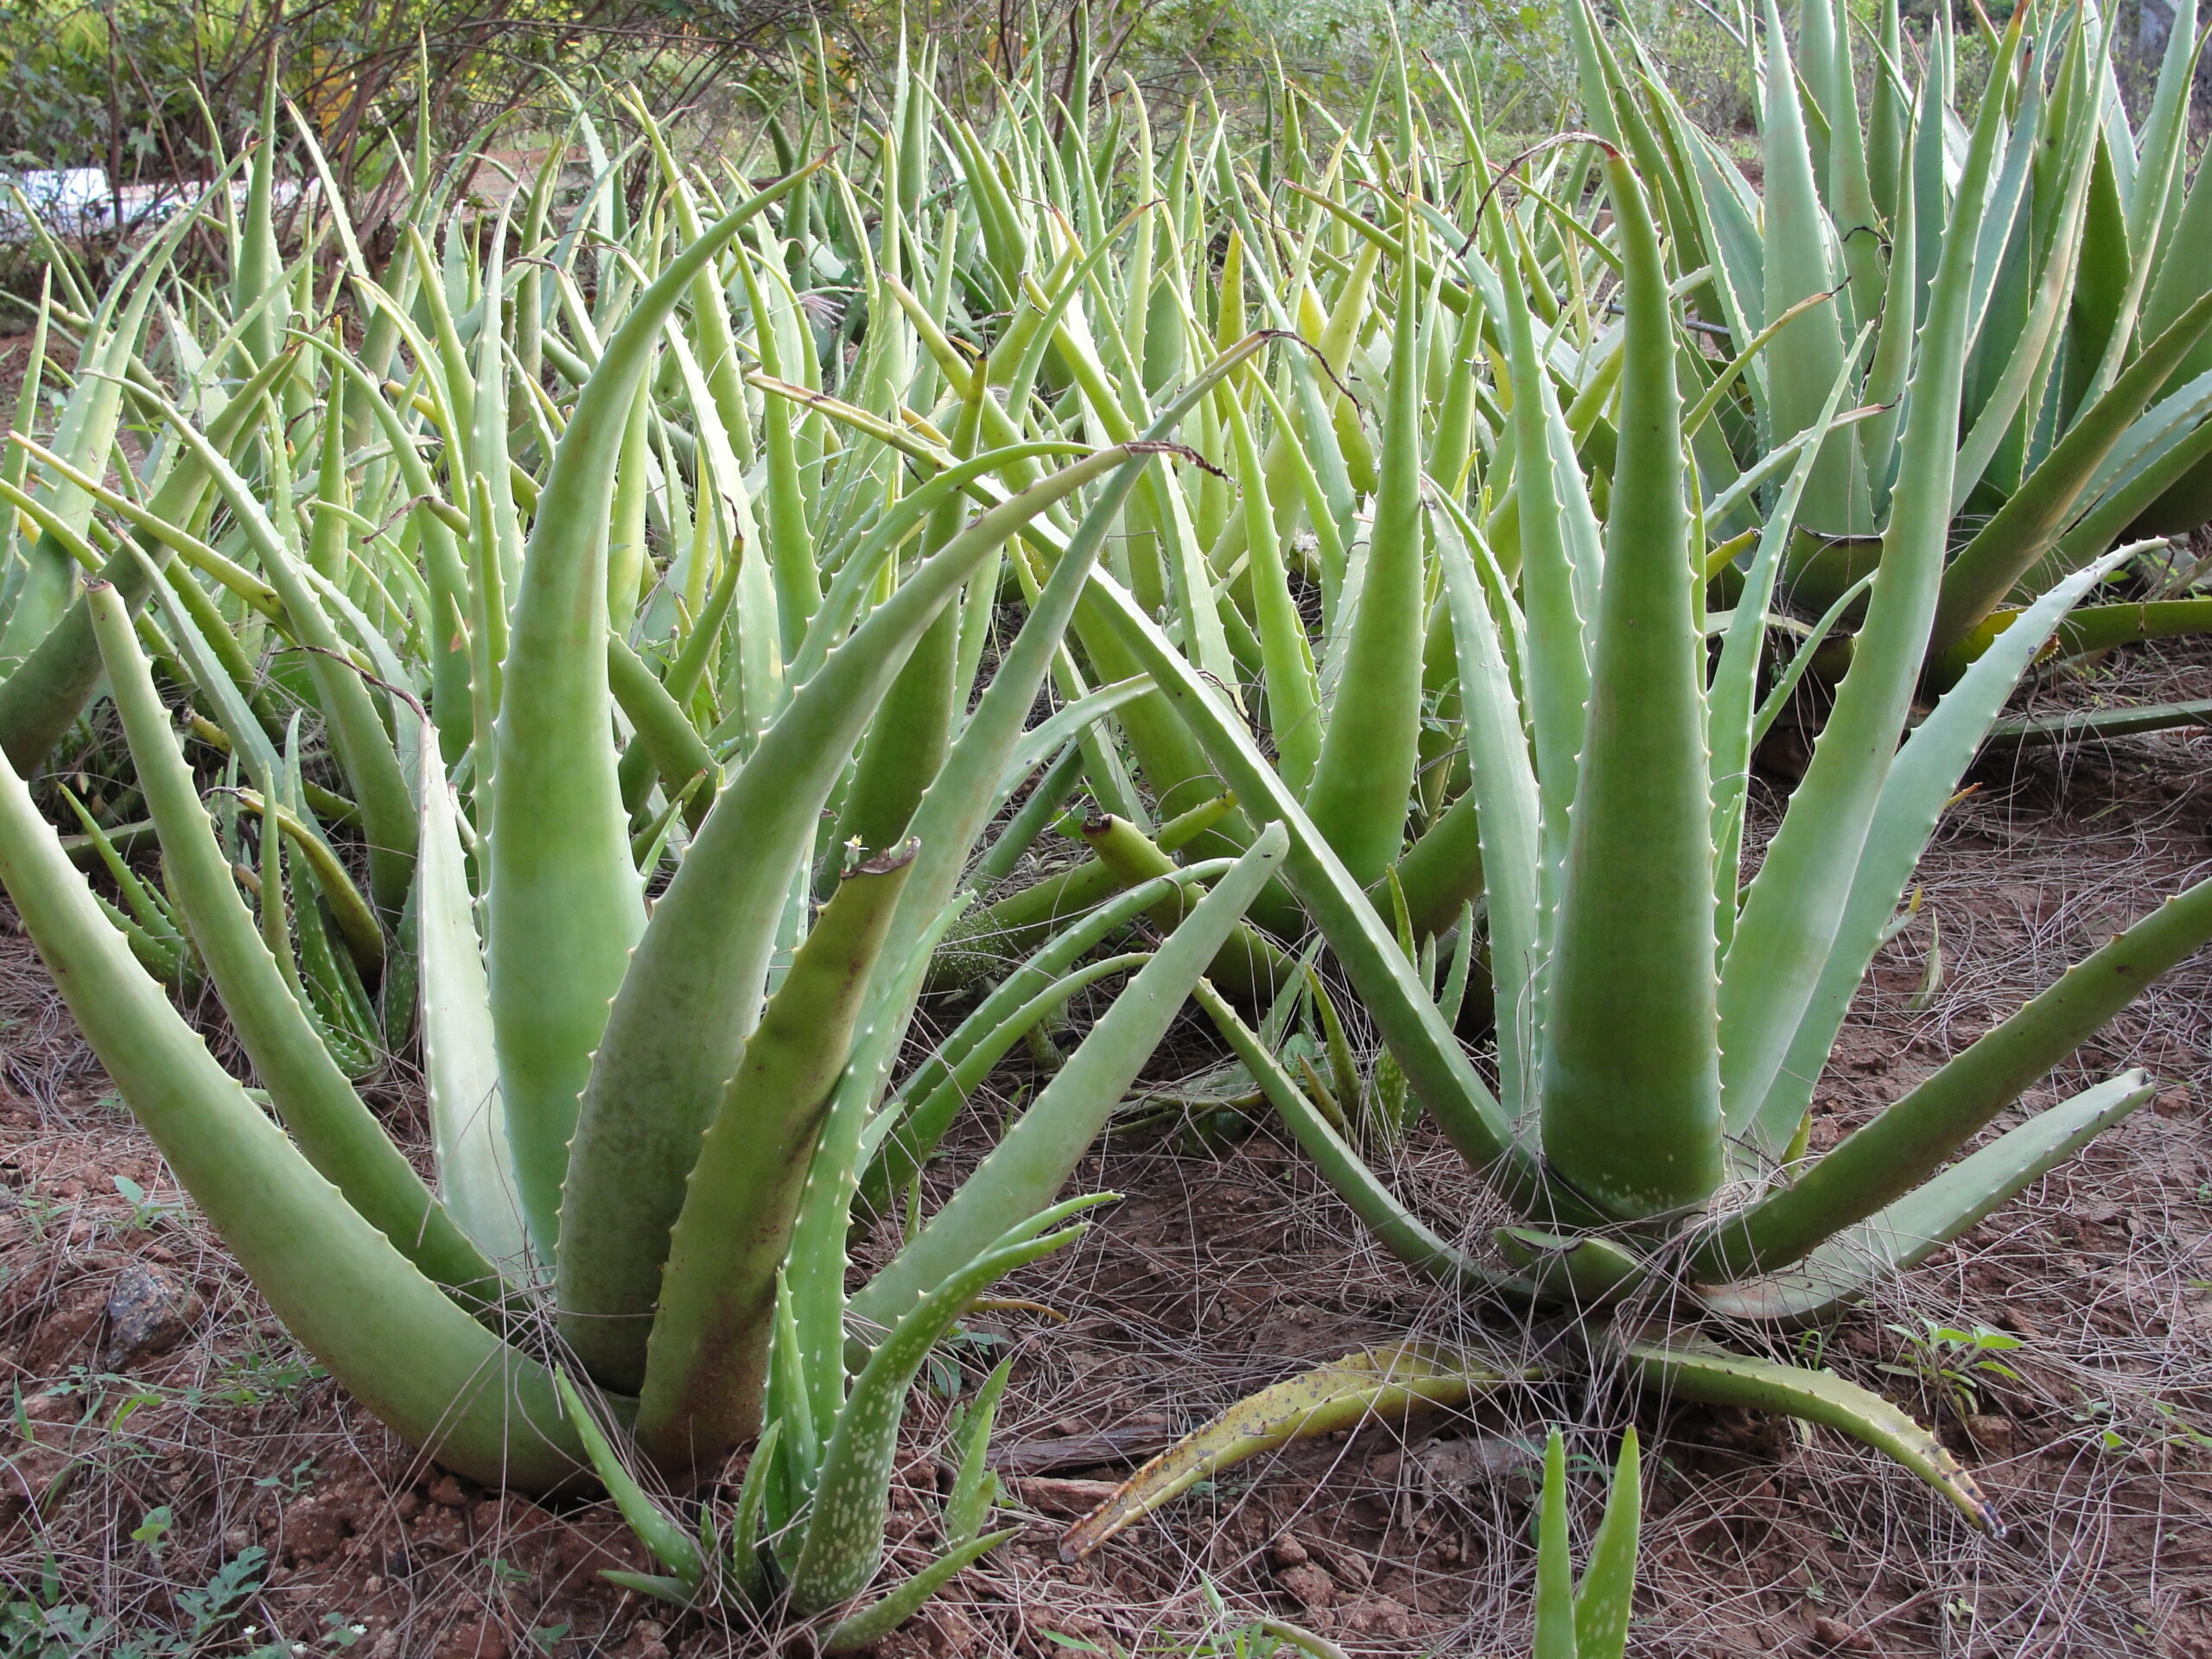 WBBSE Notes For Class 8 General Science And Environment Chapter 11 Plant Kingdom And Environment Arounds Us Aloe vera